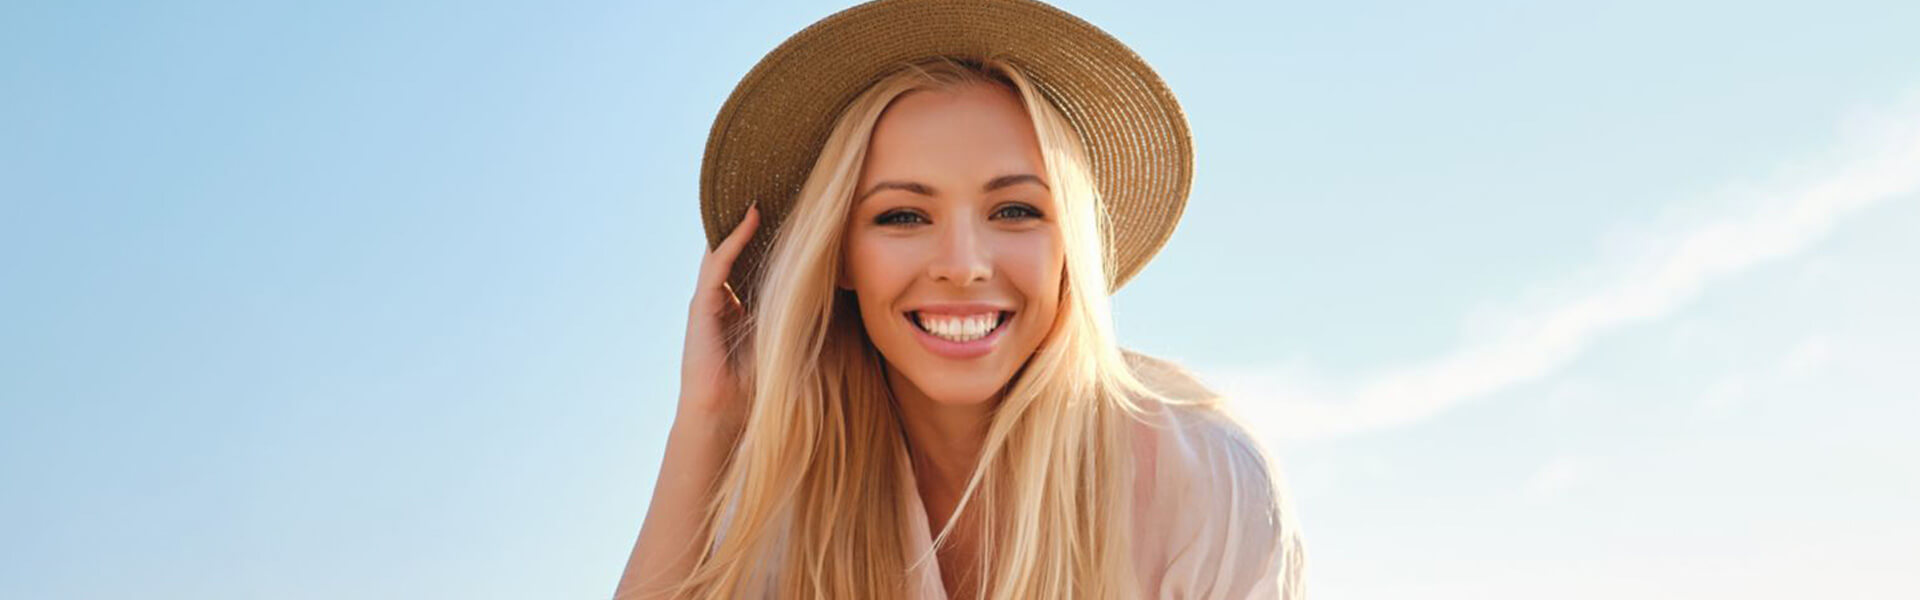 Cosmetic Dentistry: Improve Your Smile Through These 7 Tooth Restoration Options